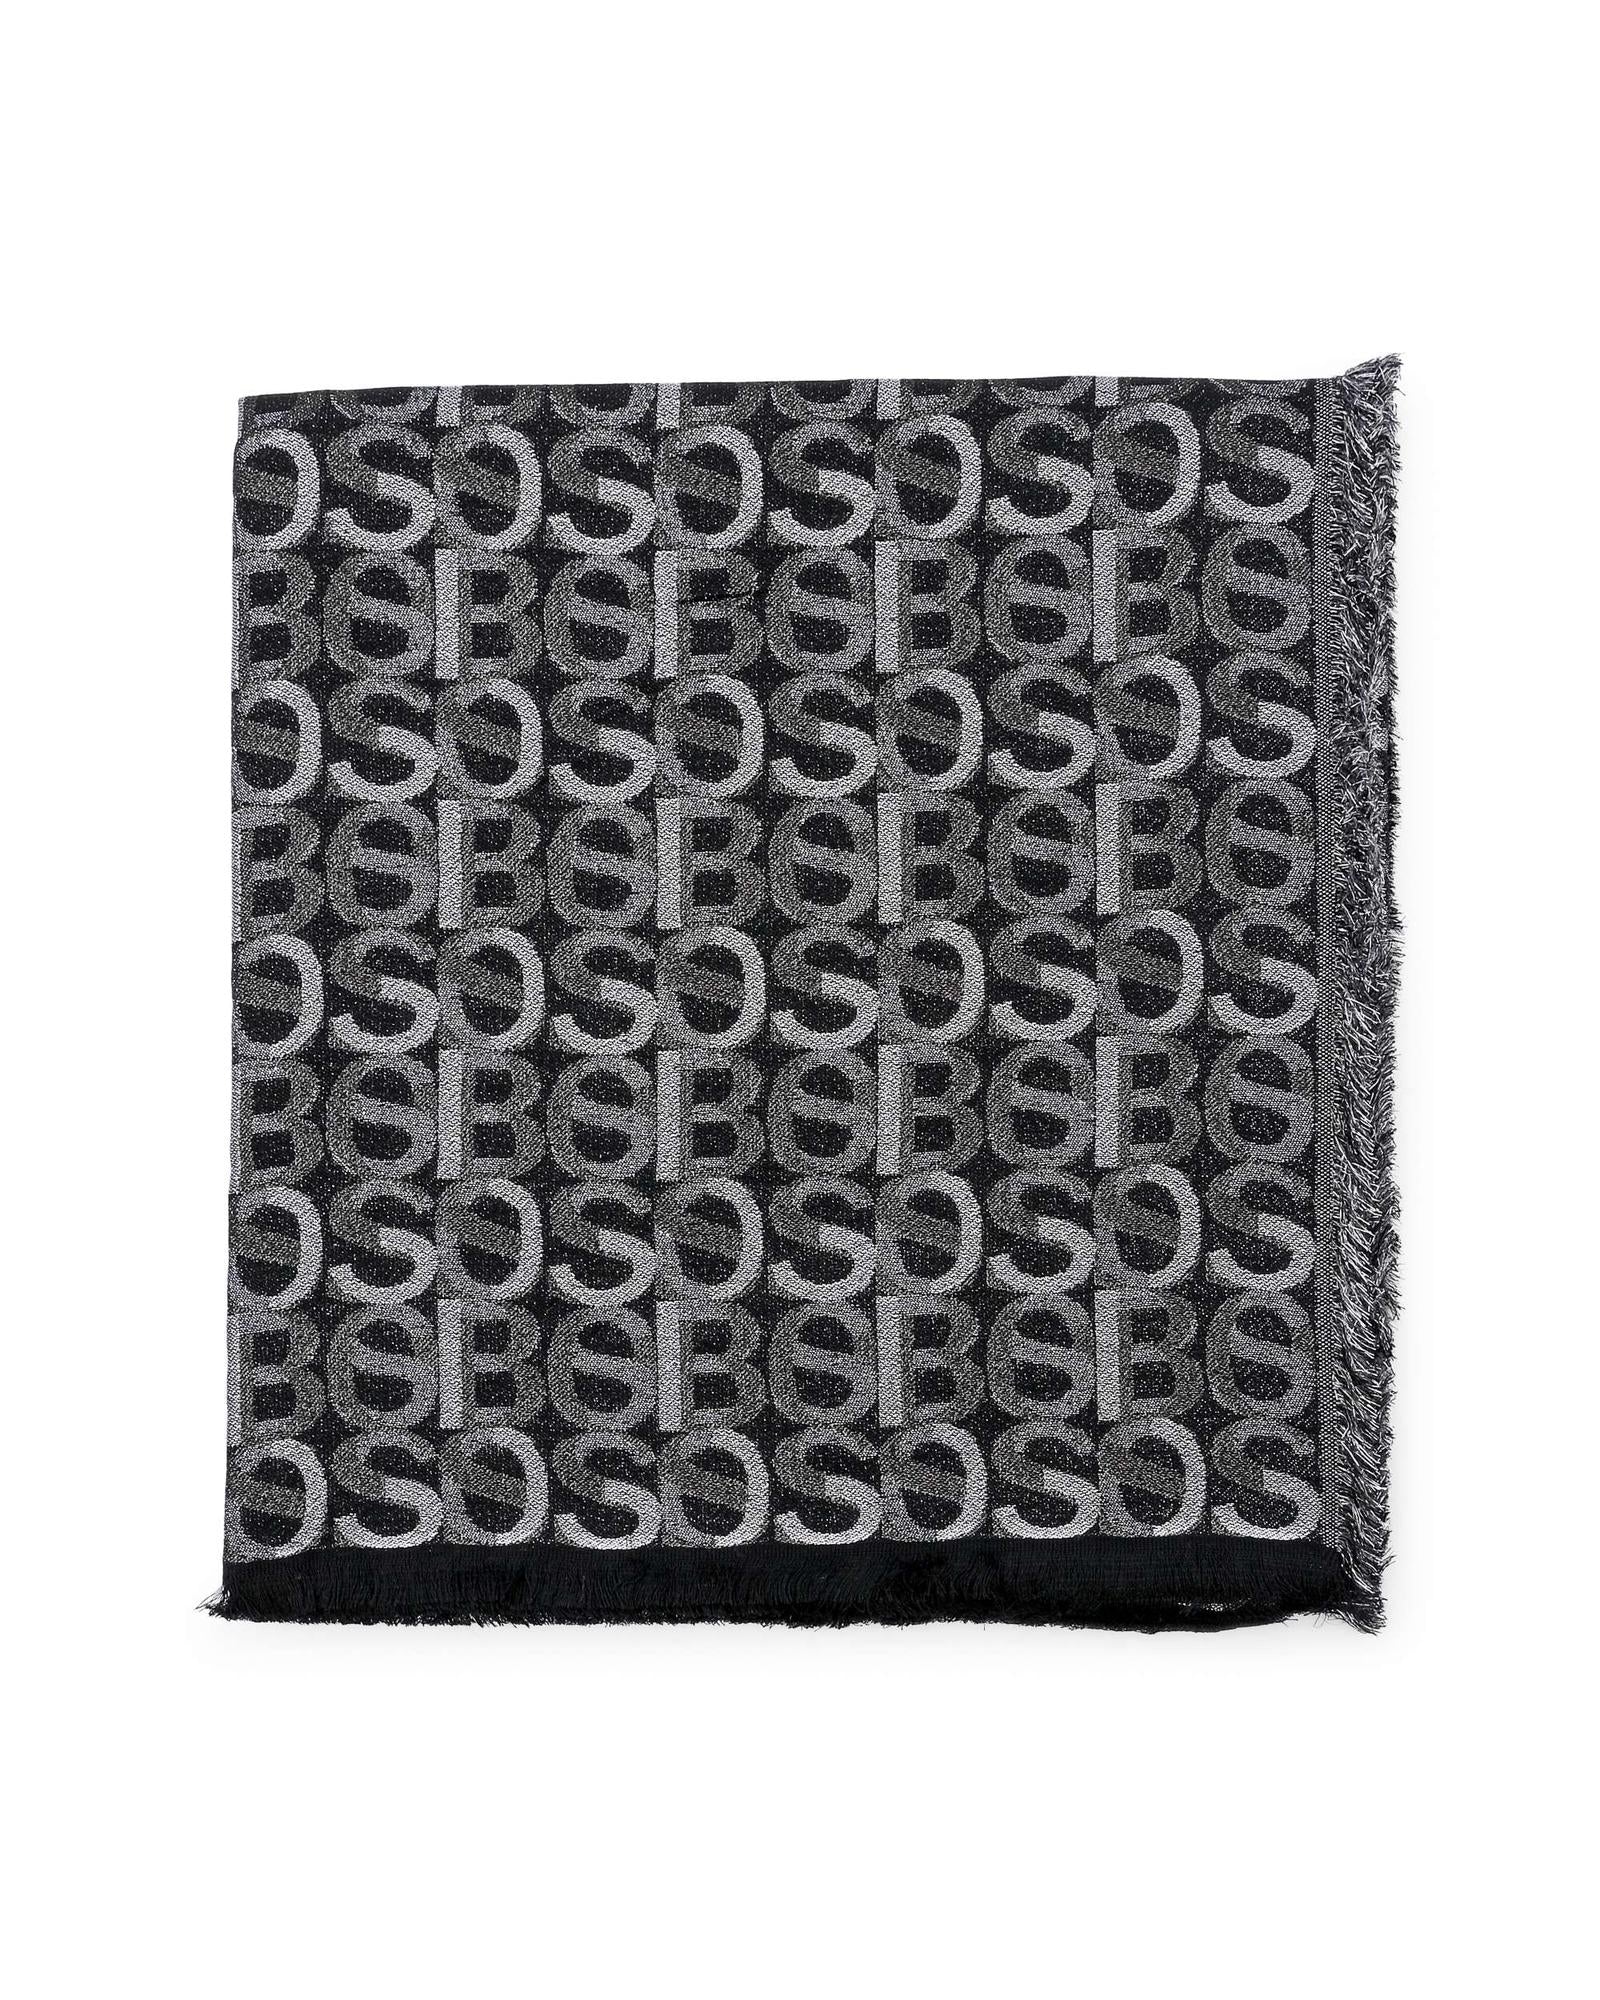 Women's Modal and Wool Blend Scarf with Metallic Detail in Black - One Size